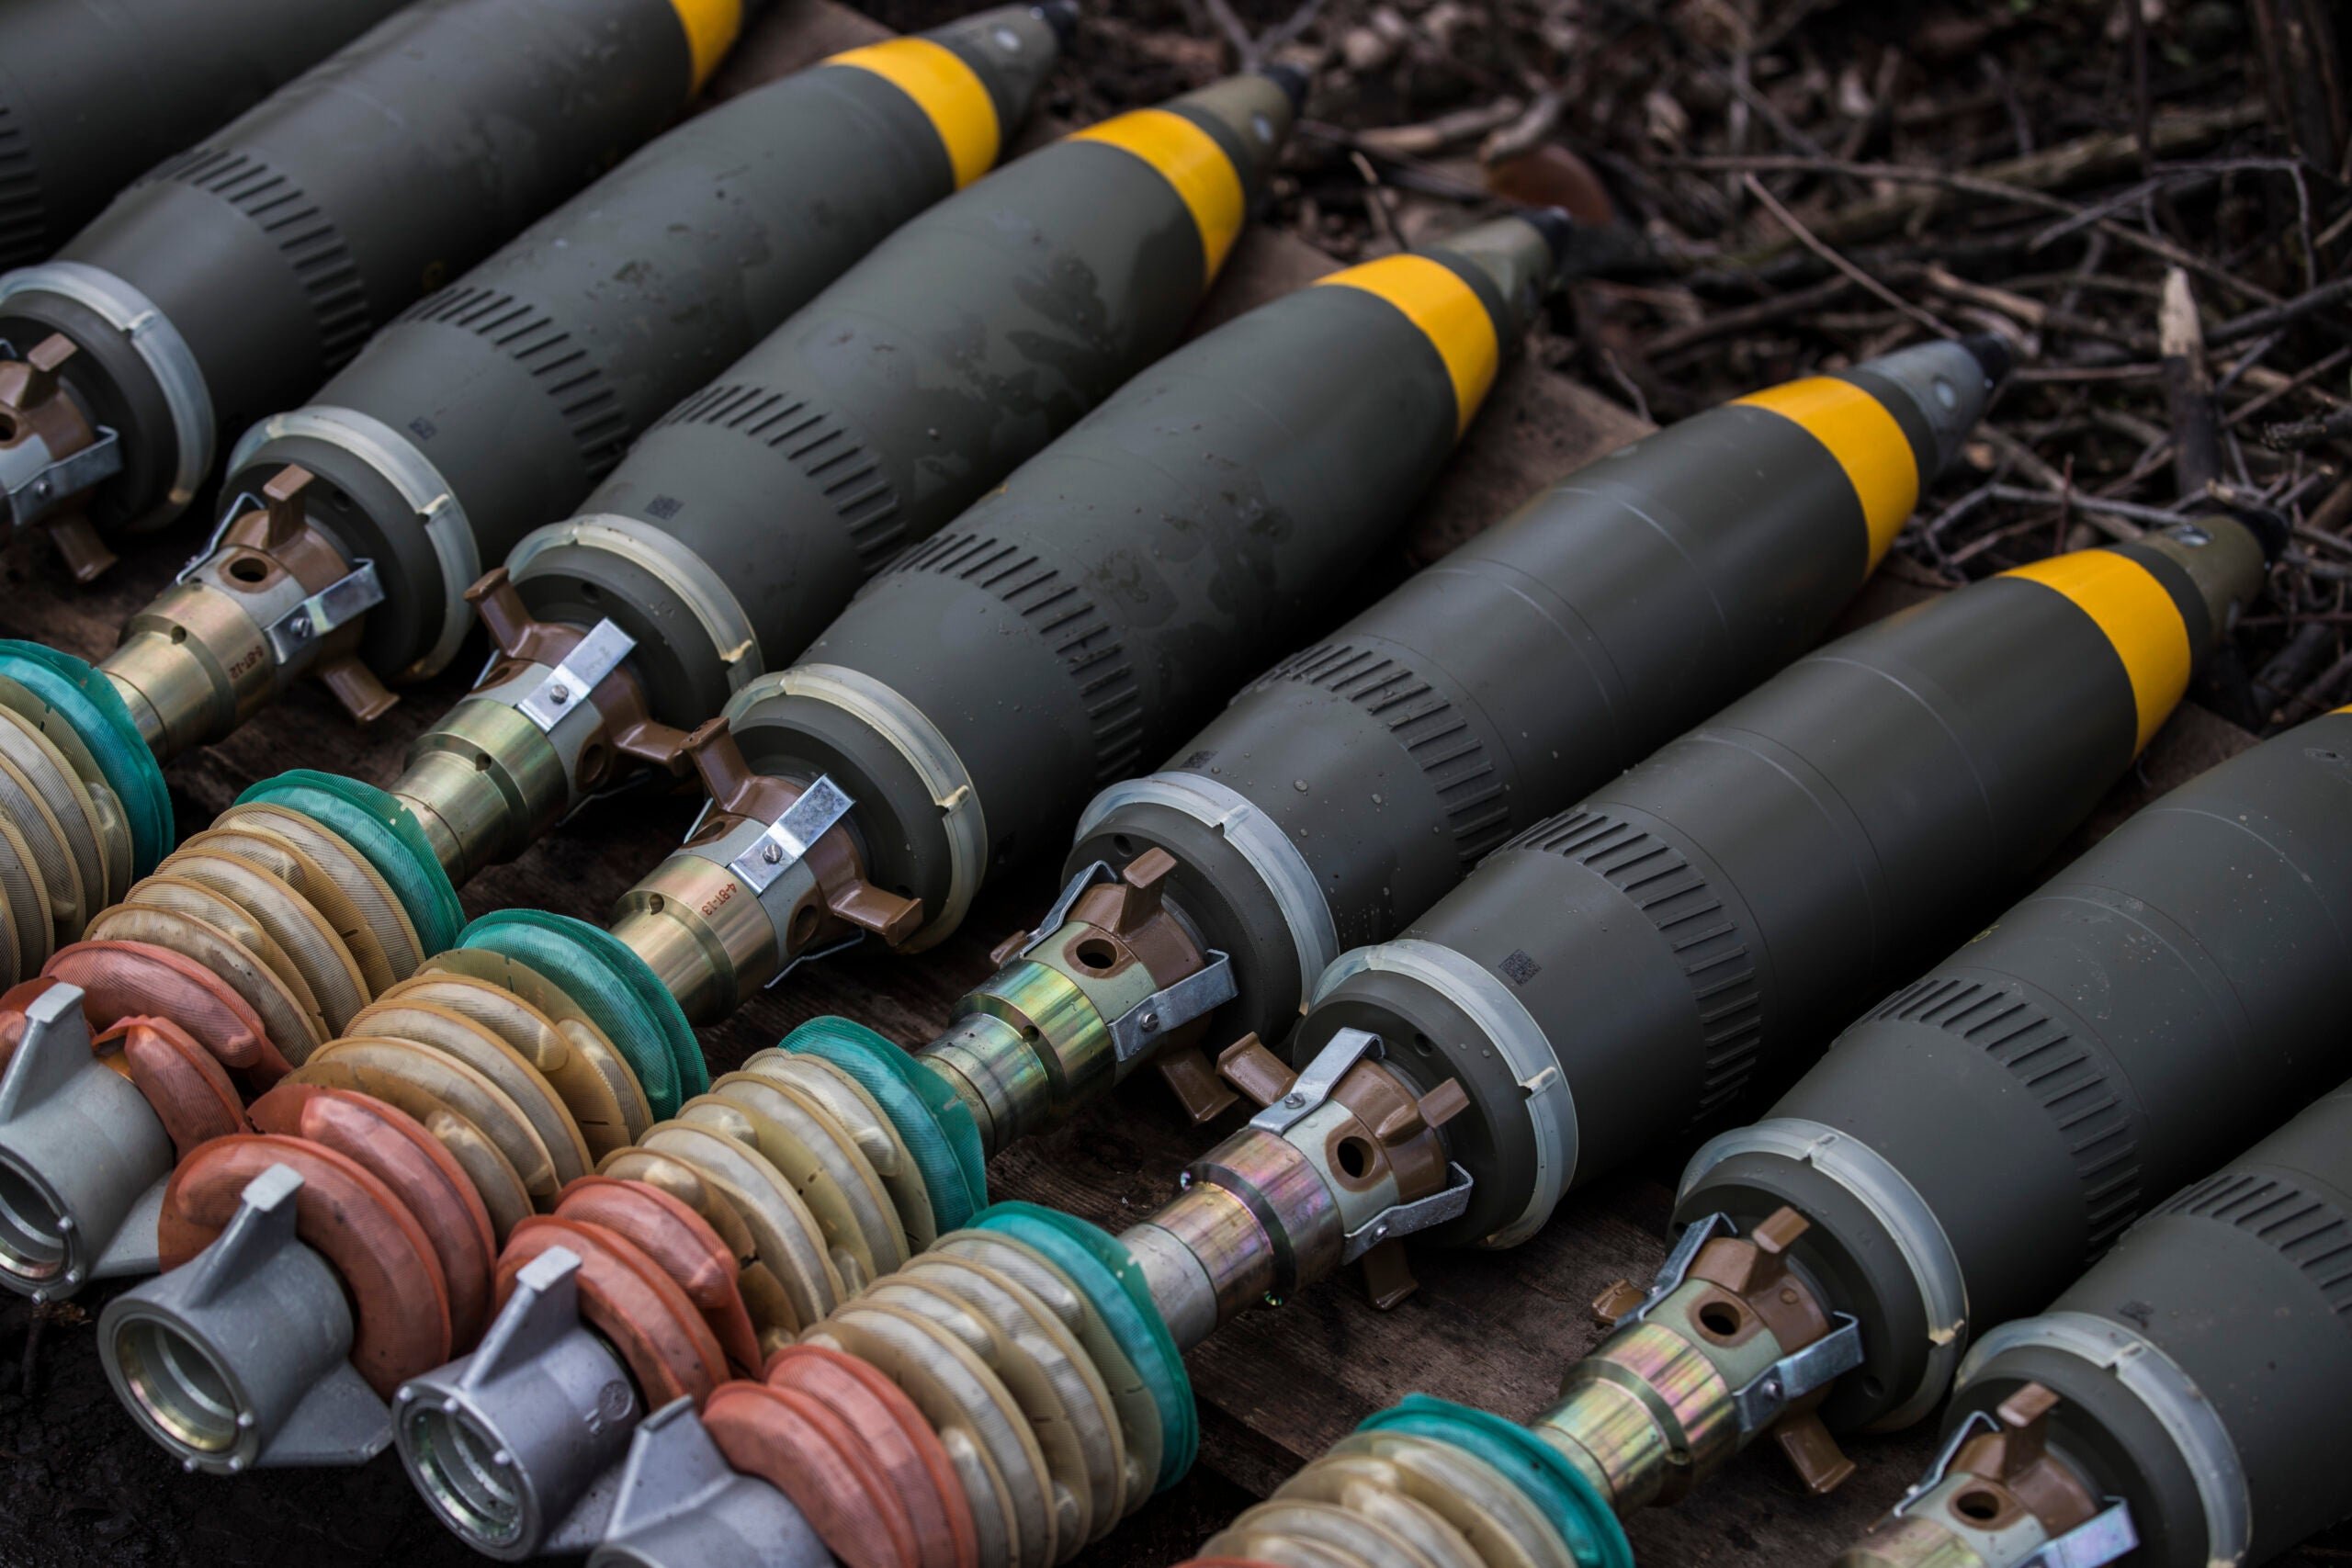 DONETSK OBLAST, UKRAINE - APRIL 24: Mortar rounds with propellant rings lie on the ground on April 24, 2023 in Donetsk Oblast, Ukraine. (Photo by Yuriy Mate/Global Images Ukraine via Getty Images)